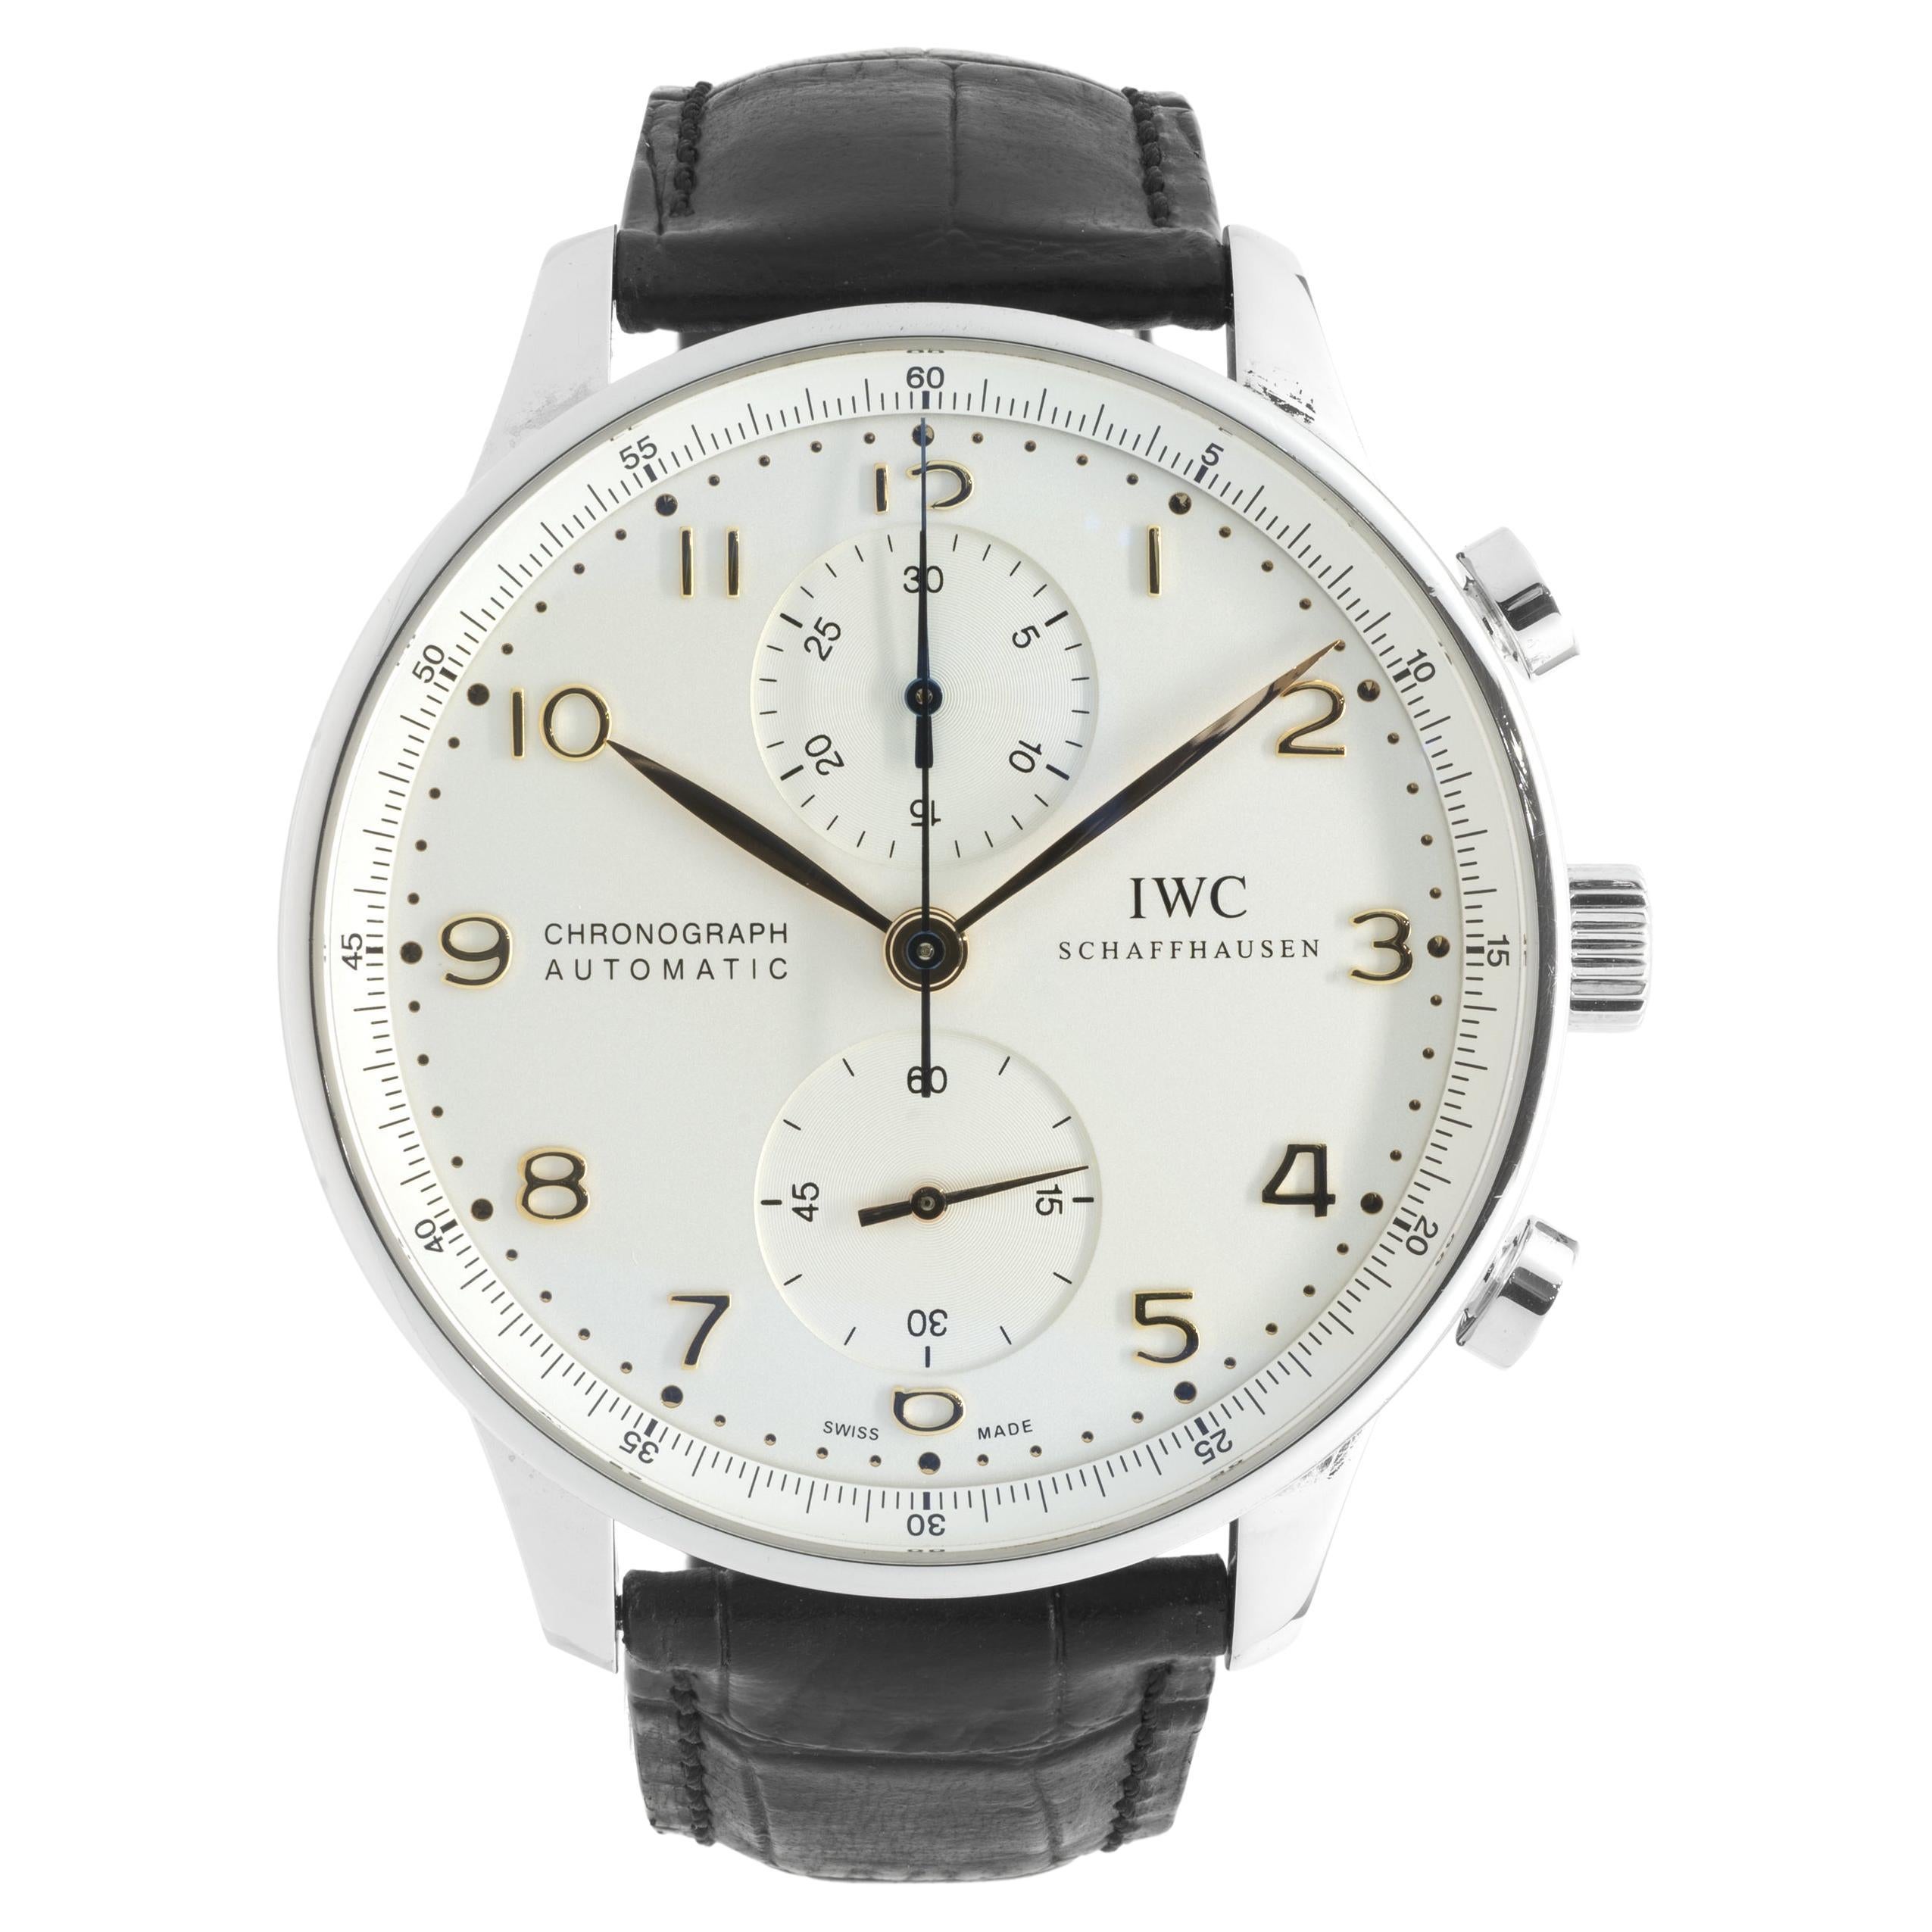 IWC Stainless Steel Portugieser Chronograph Automatic